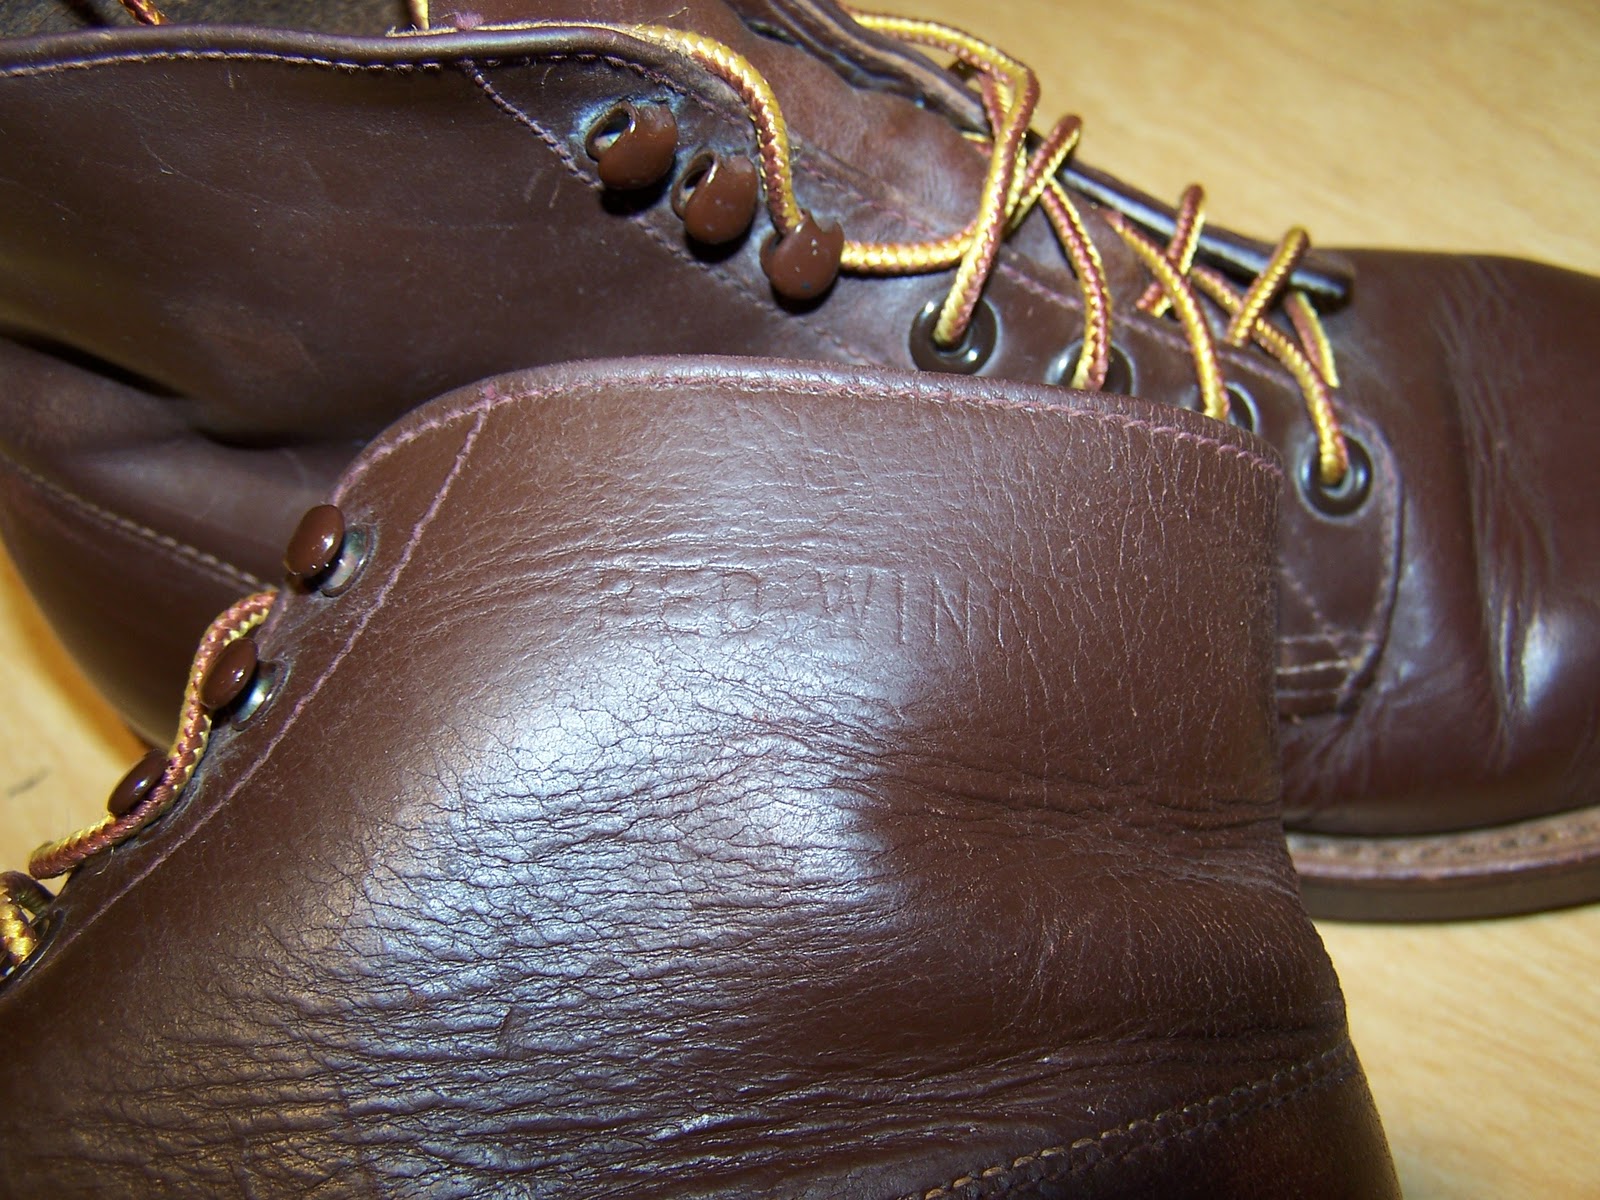 ShopDetour: Daily ramblings of two denim nerds: Vintage Red Wing Boots